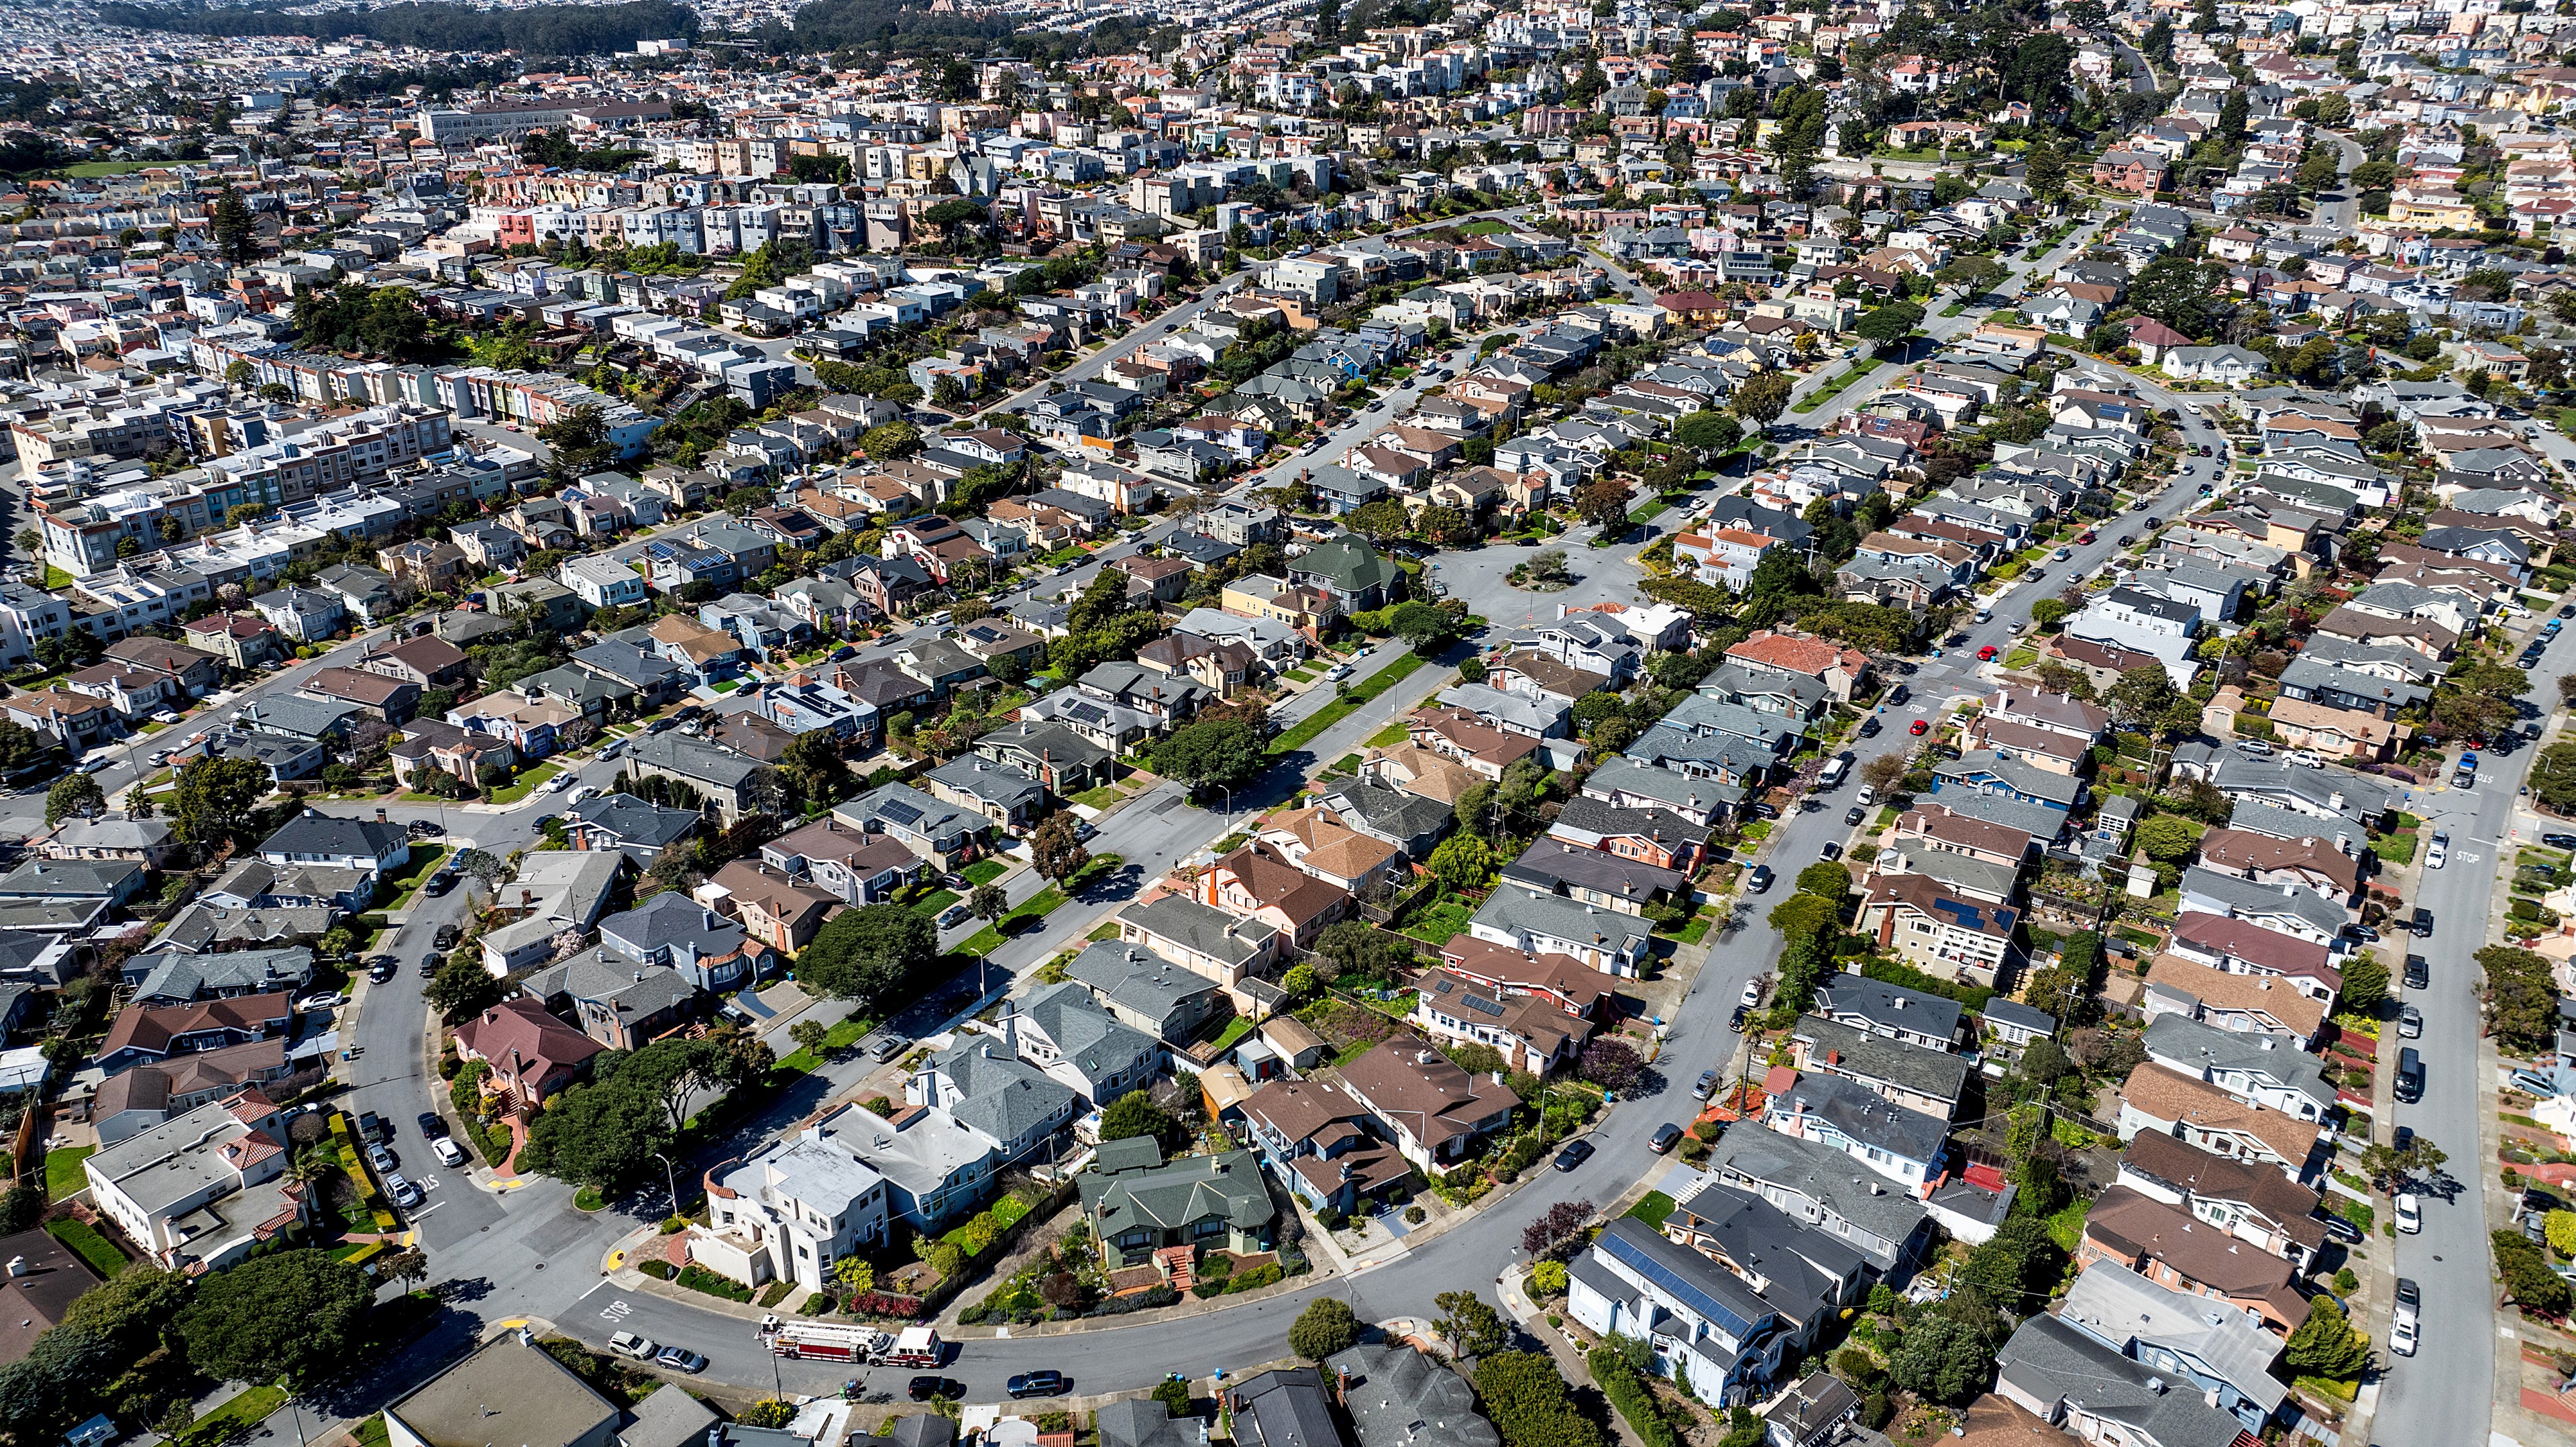 Aerial view of a dense residential area with rows of houses and intersecting streets.